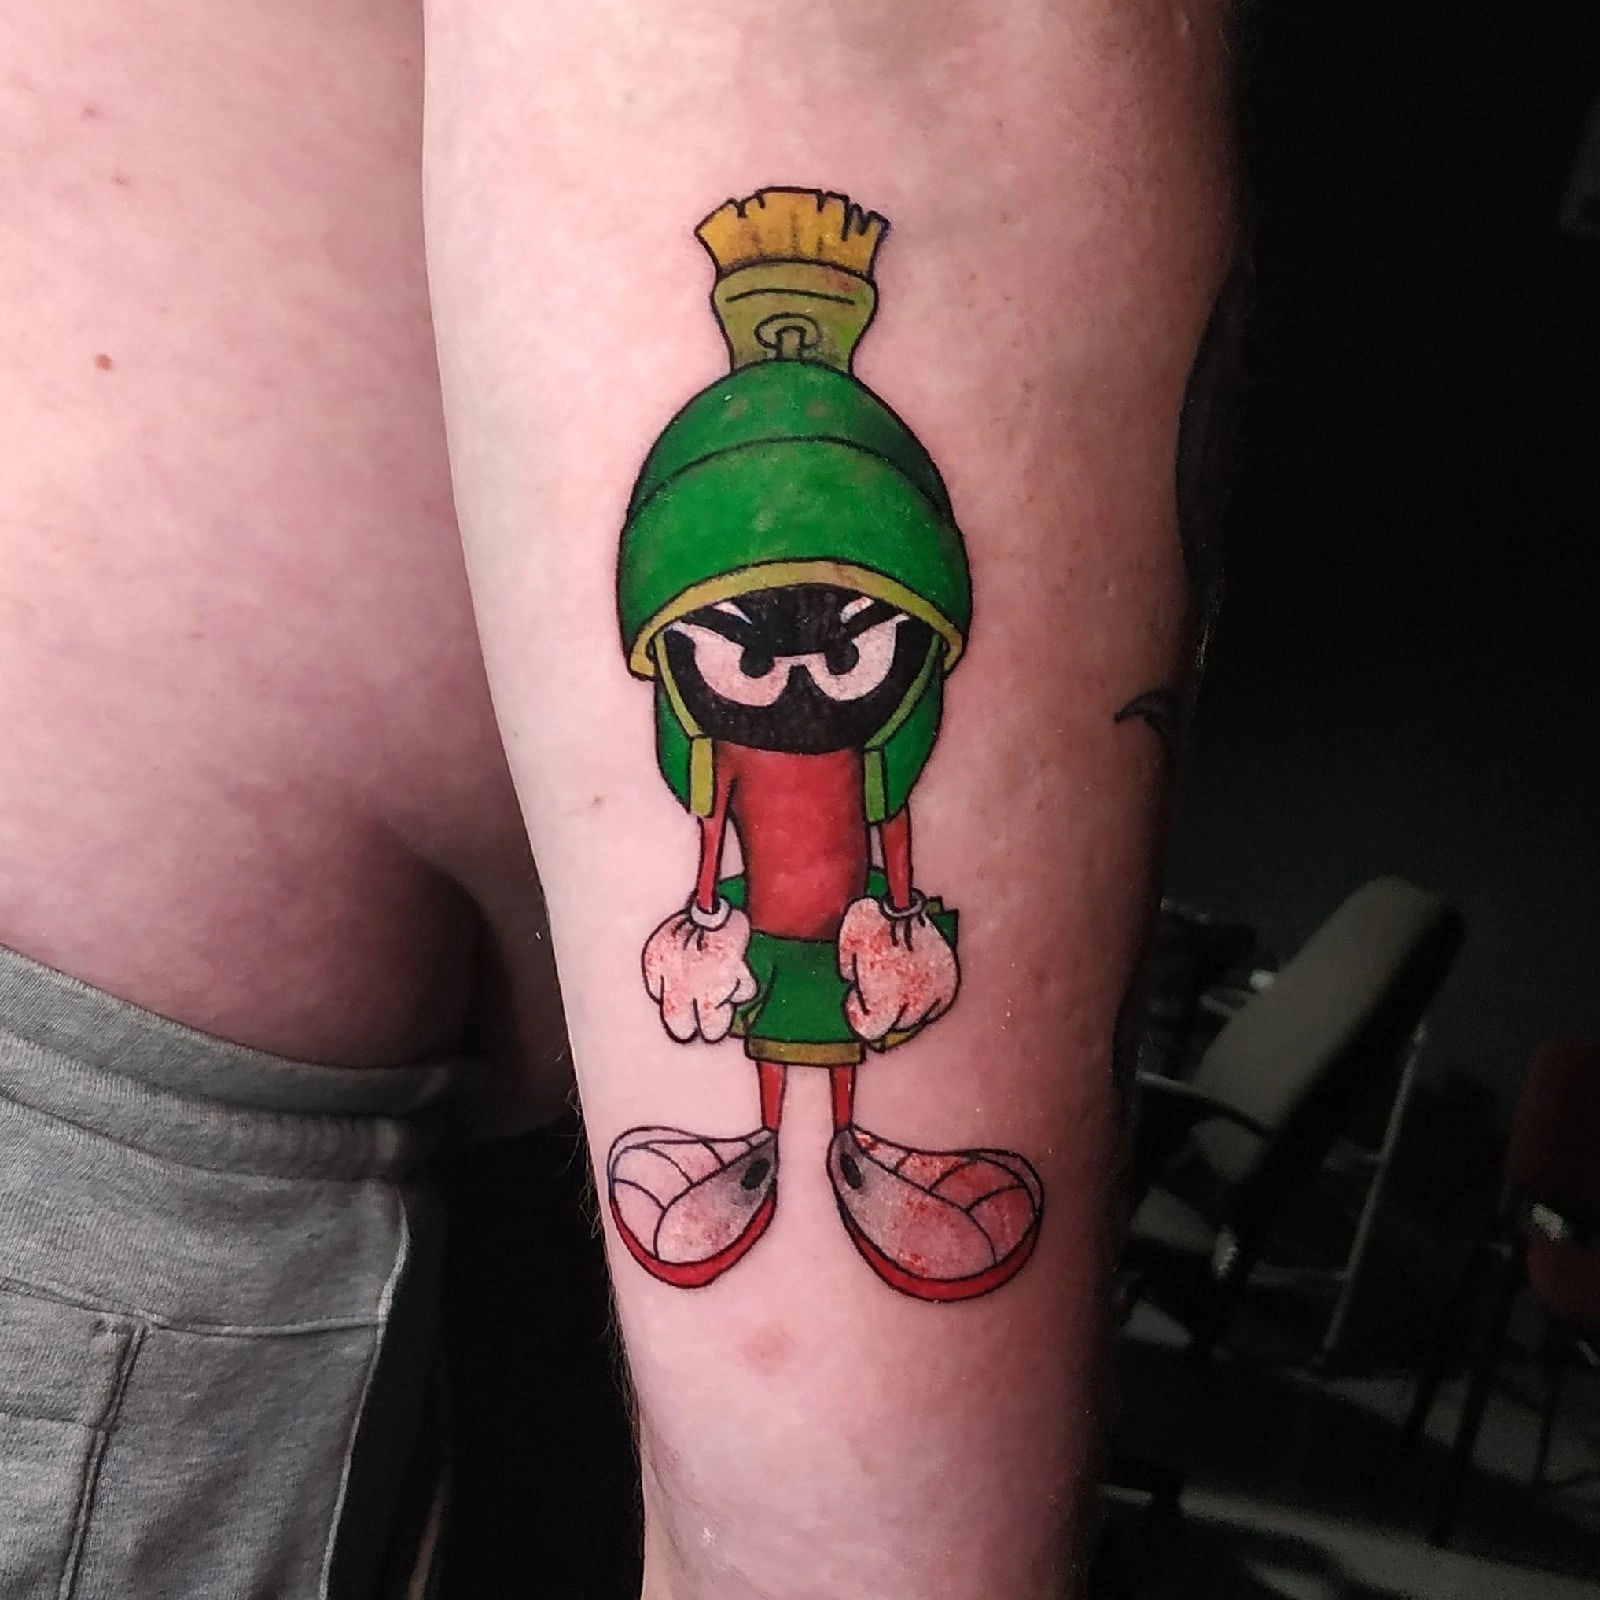 Marvin the martian tattoo outline